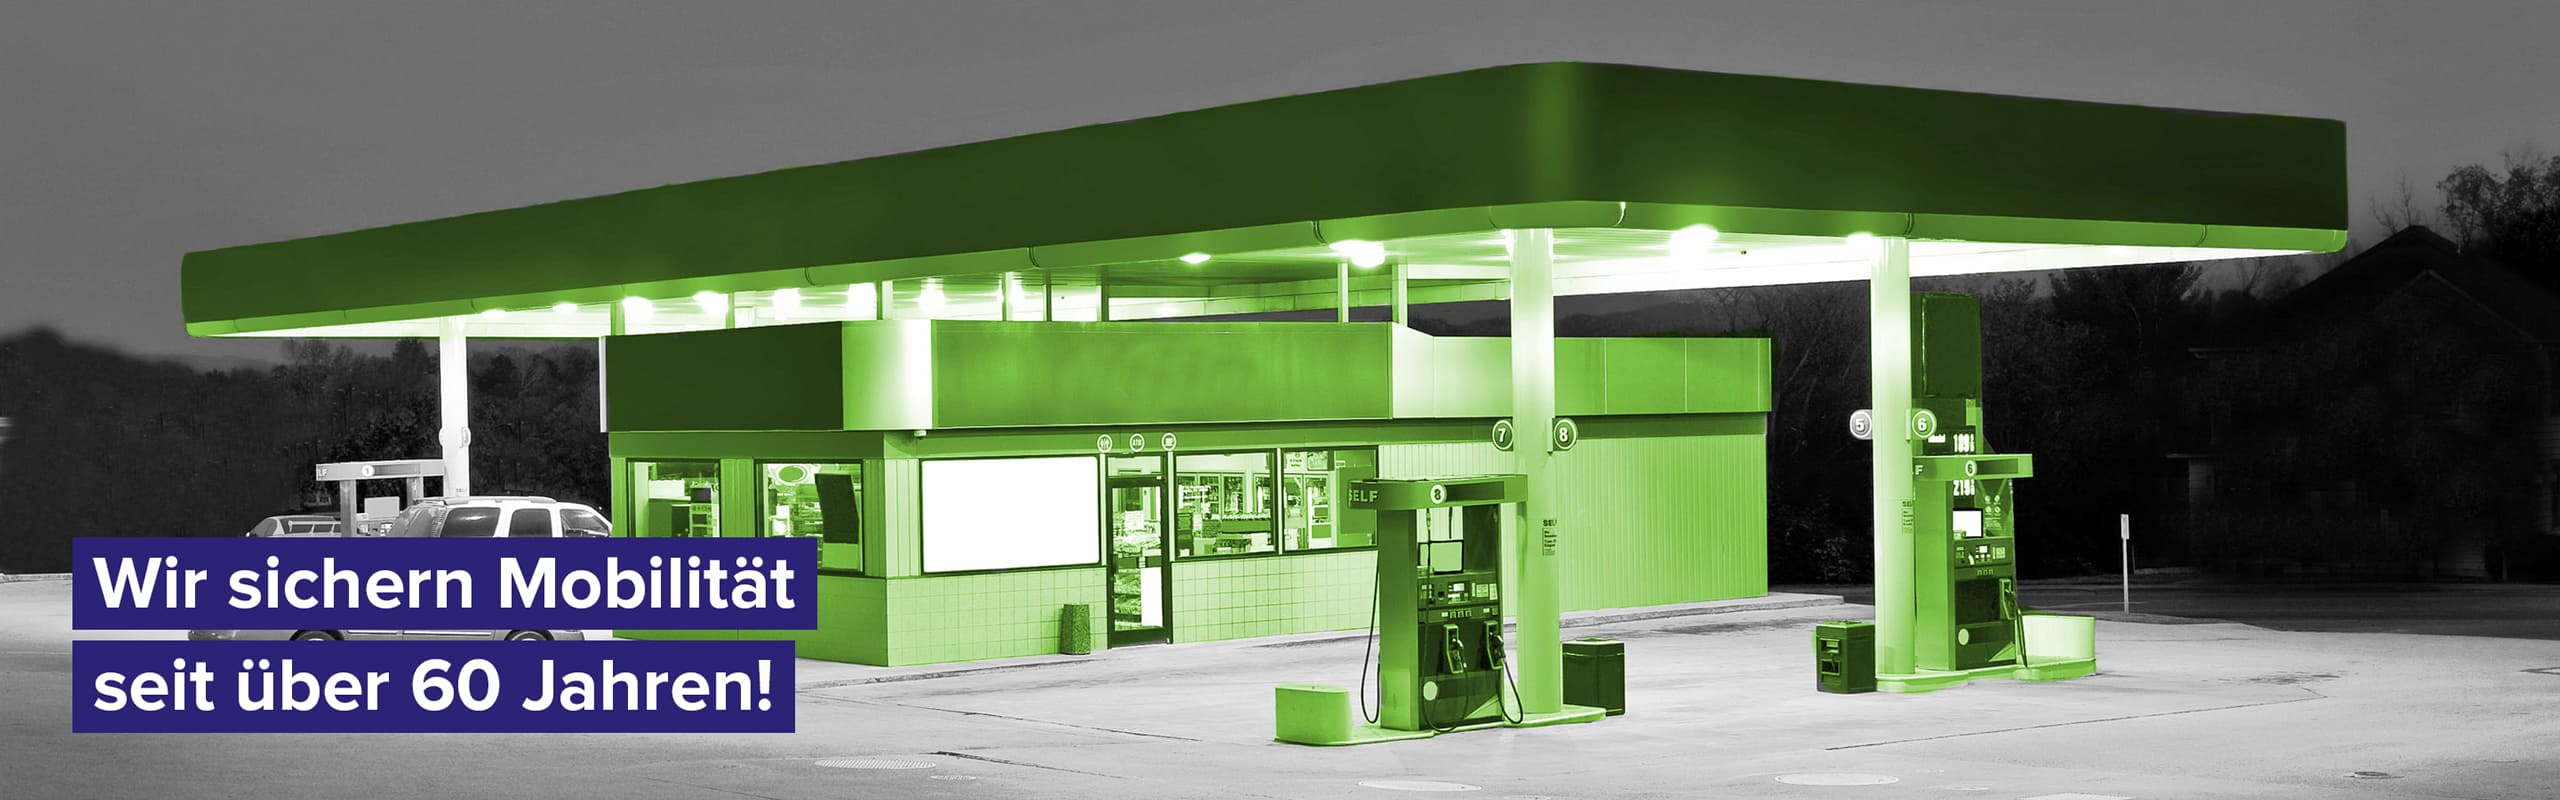 Retail Convenience Store And Gasoline Station